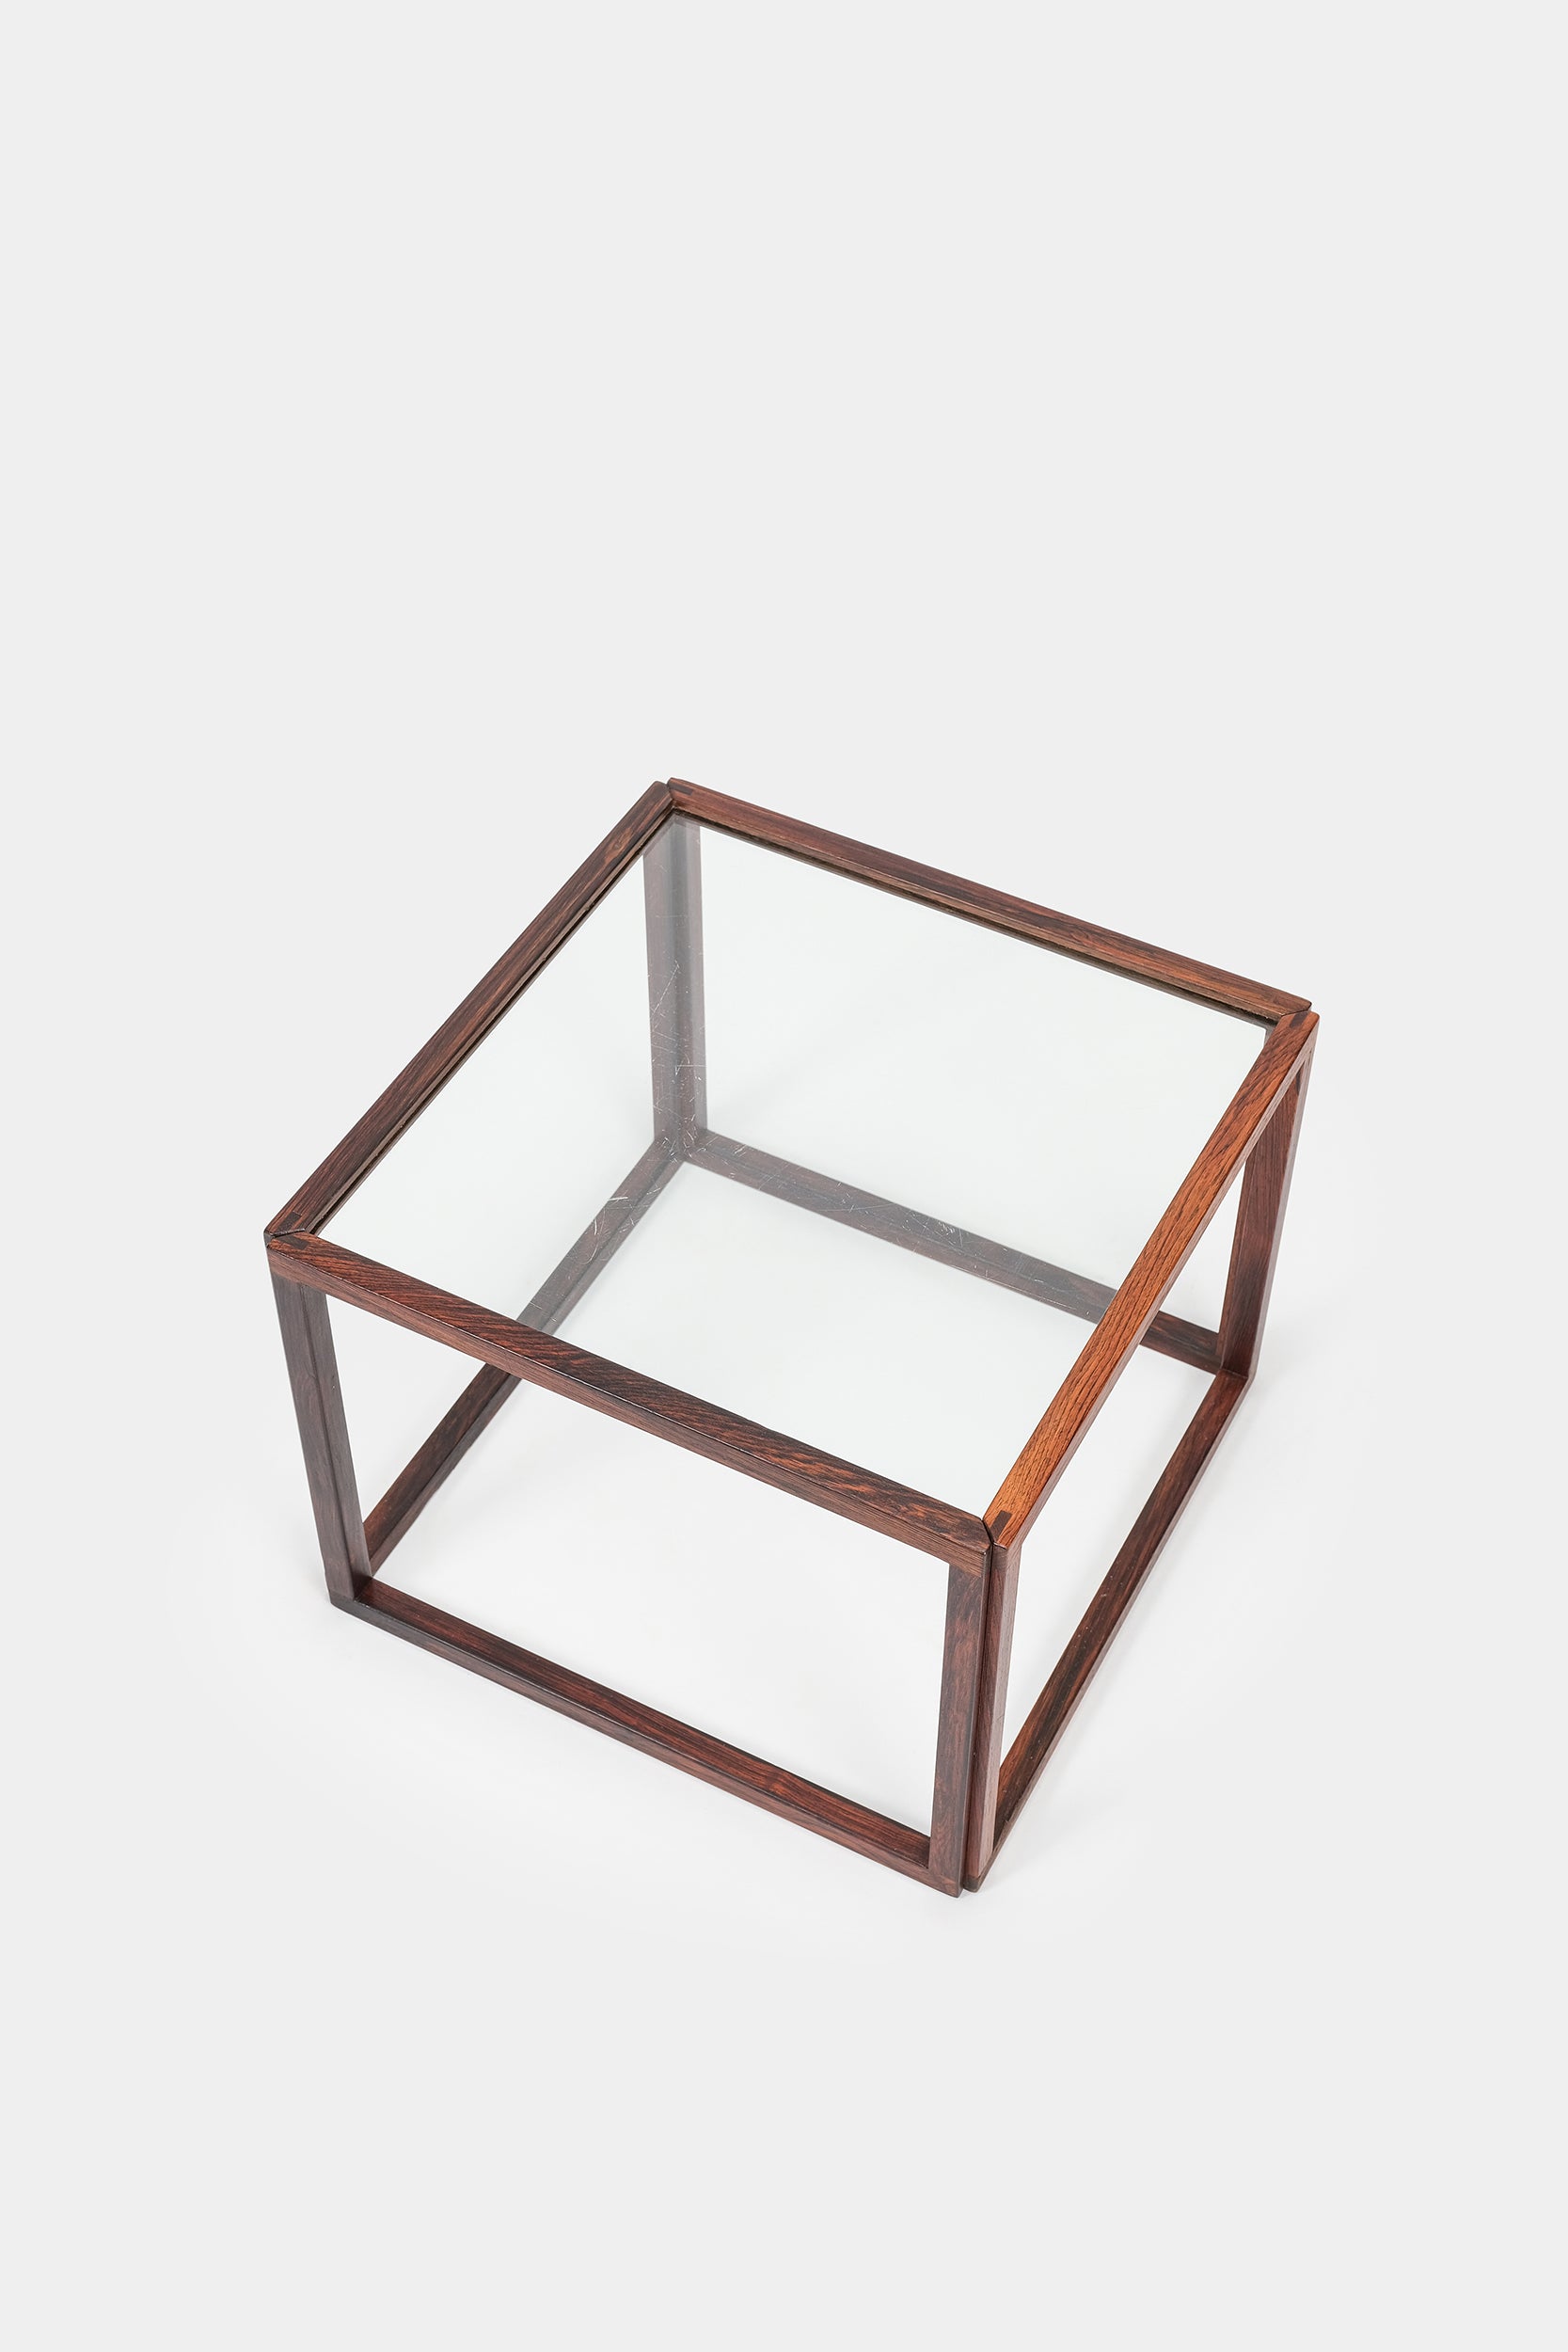 Kai Kristiansen, Club Table, Rosewood with Inset Glass, 60s